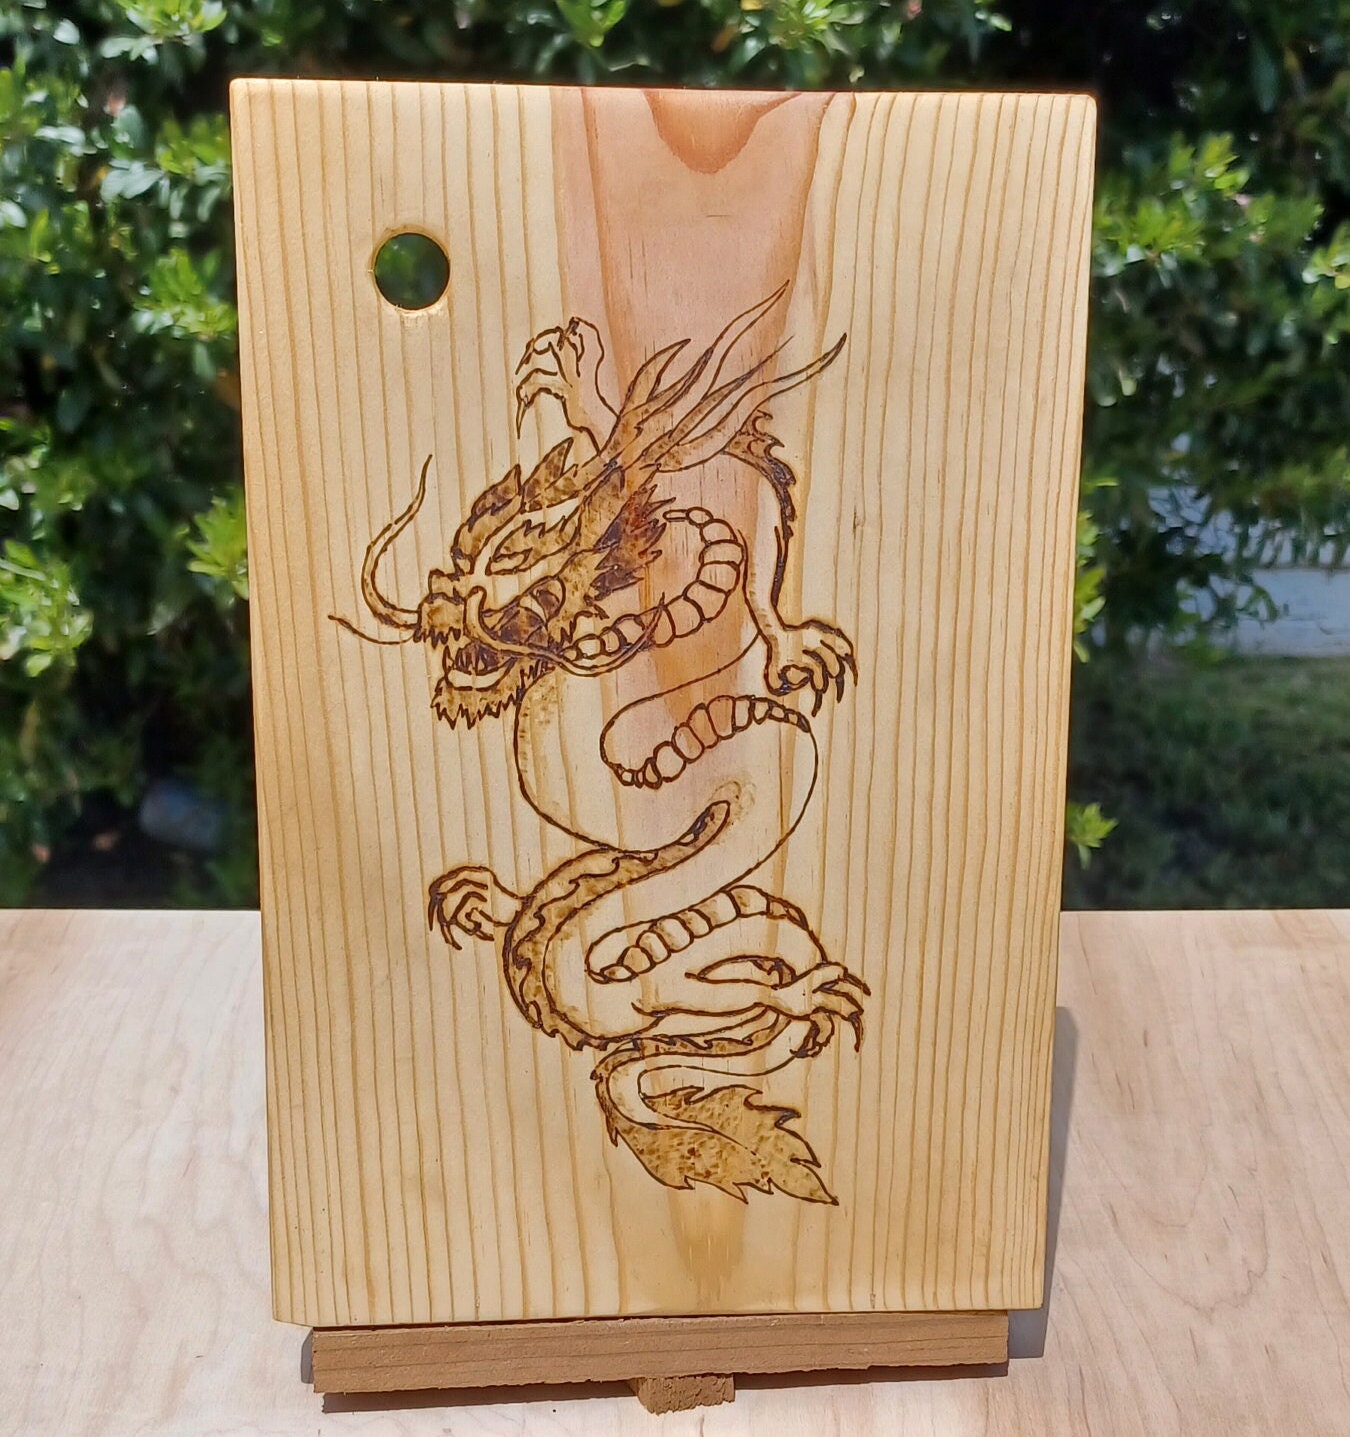 Our Dragon Segus.  Wood burning, Wood pieces, Wood